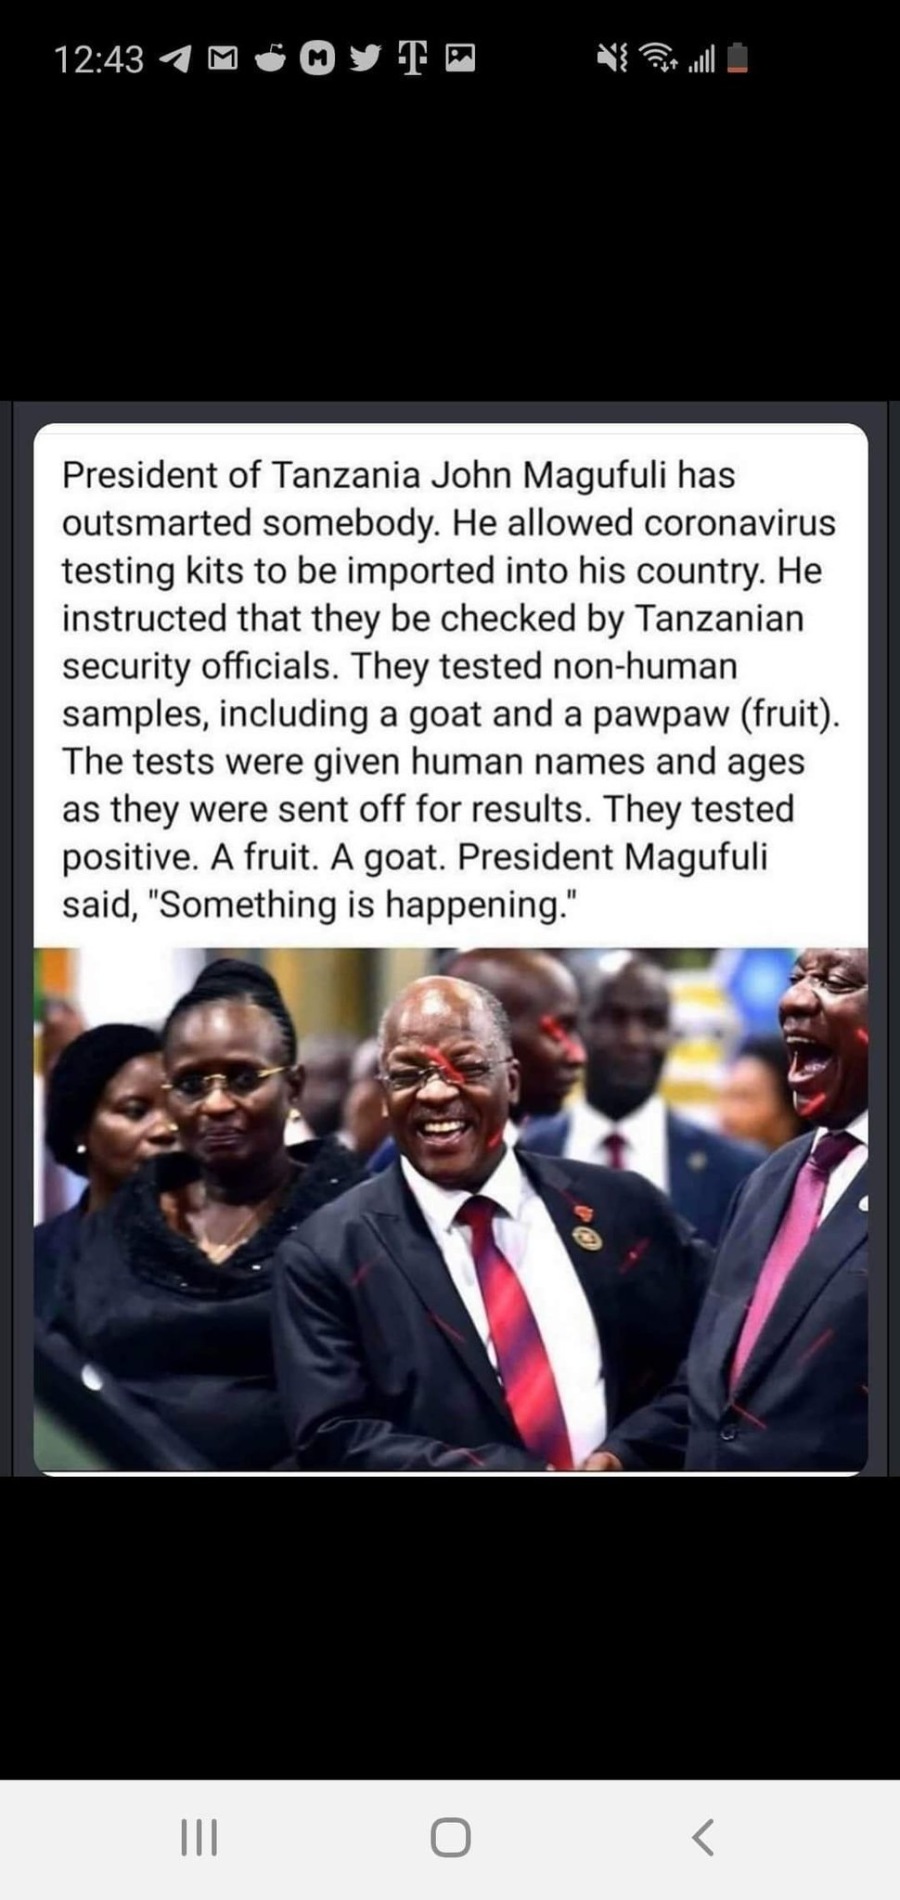 124340 eo @Y T N= al

President of Tanzania John Magufuli has
outsmarted somebody. He allowed coronavirus
testing kits to be imported into his country. He
instructed that they be checked by Tanzanian
security officials. They tested non-human
samples, including a goat and a pawpaw (fruit).
The tests were given human names and ages
as they were sent off for results. They tested
positive. A fruit. A goat. President Magufuli
said, "Something is happening.”